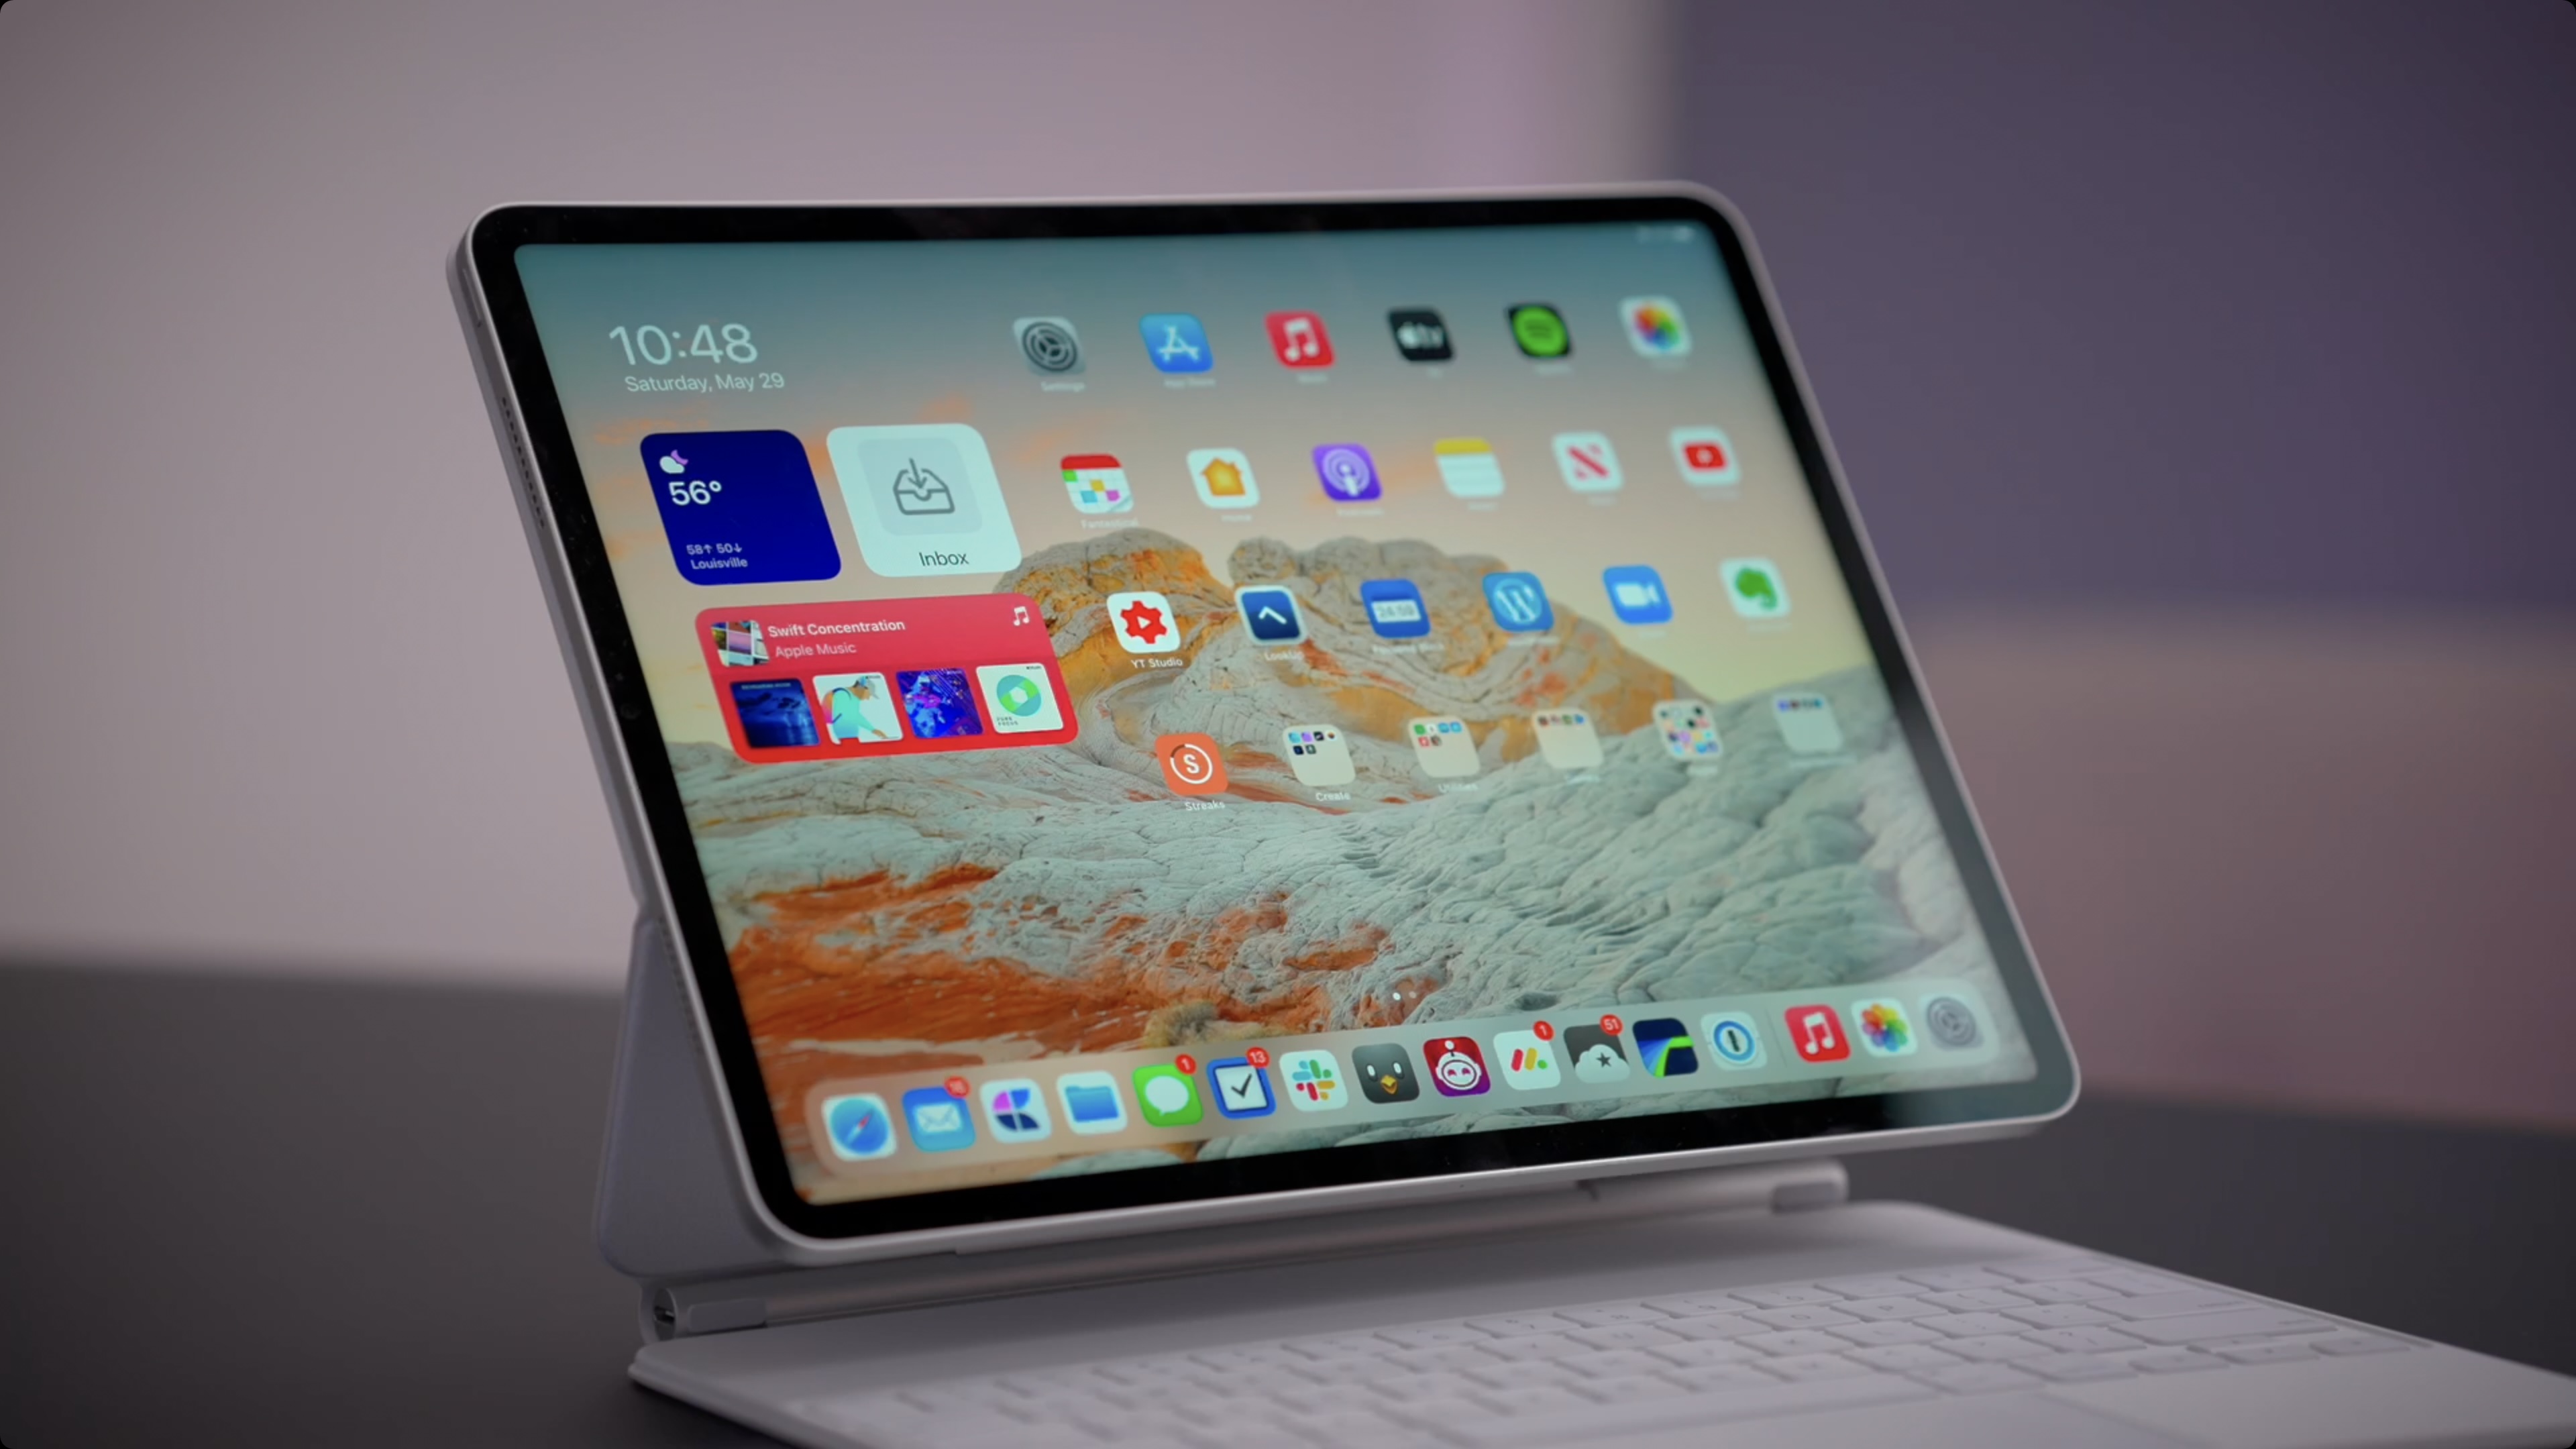 Apple just released its new M1 11inch iPad Pro, and now you can